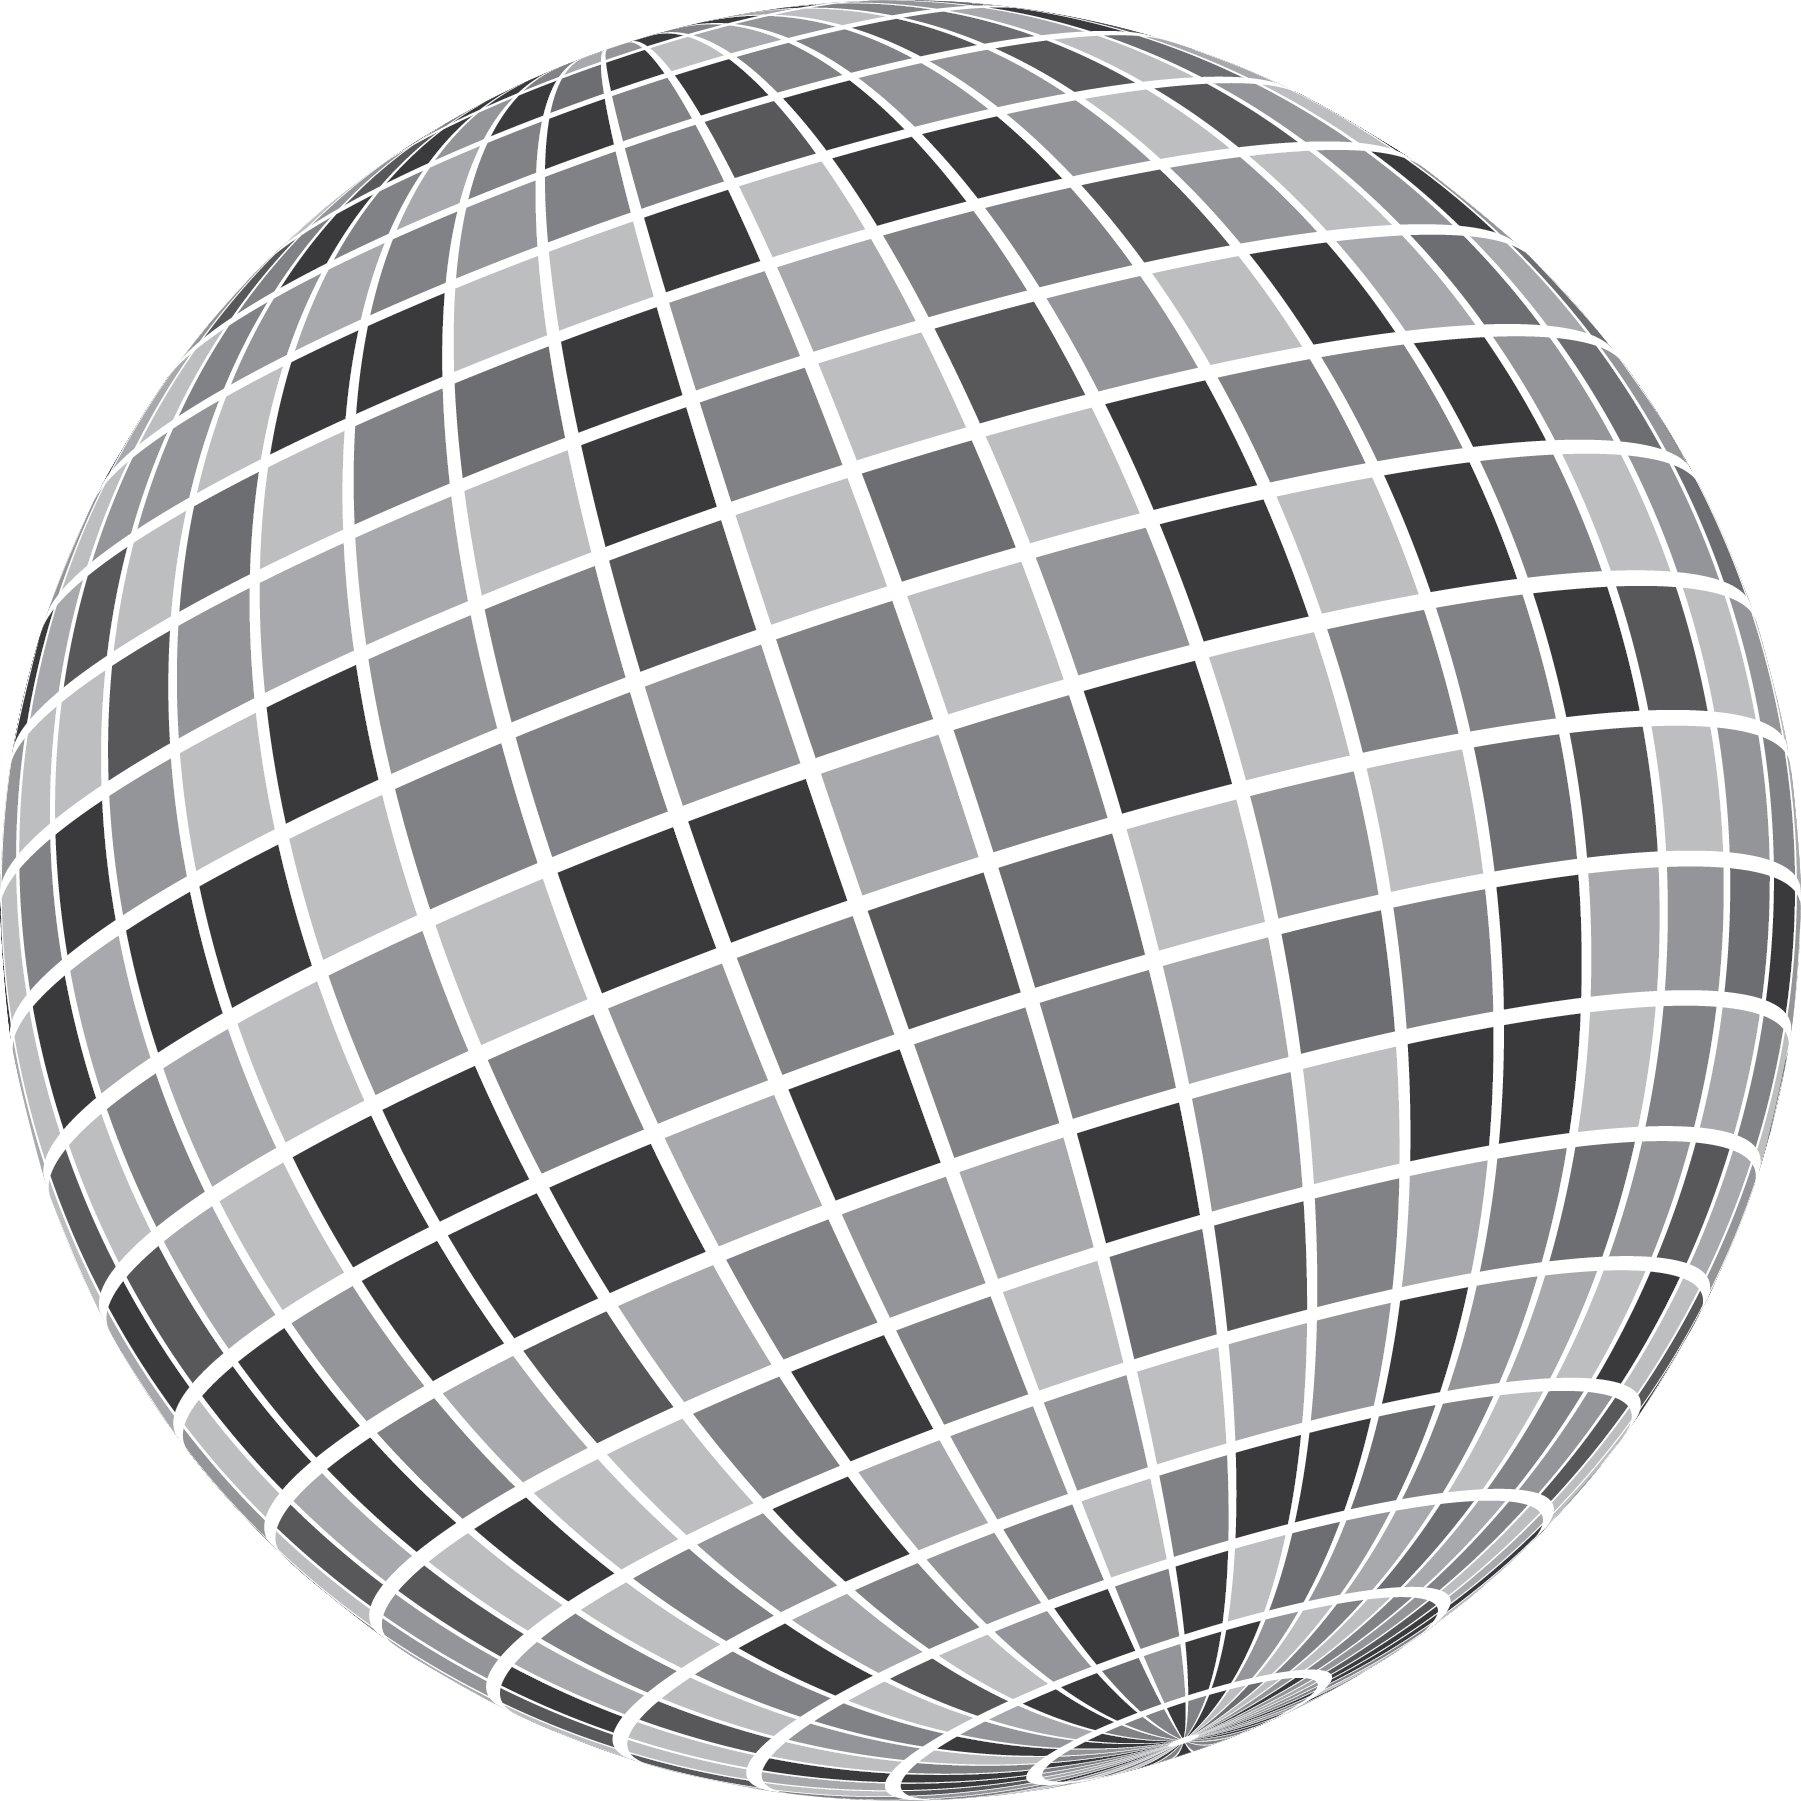 free clipart images disco ball - photo #40